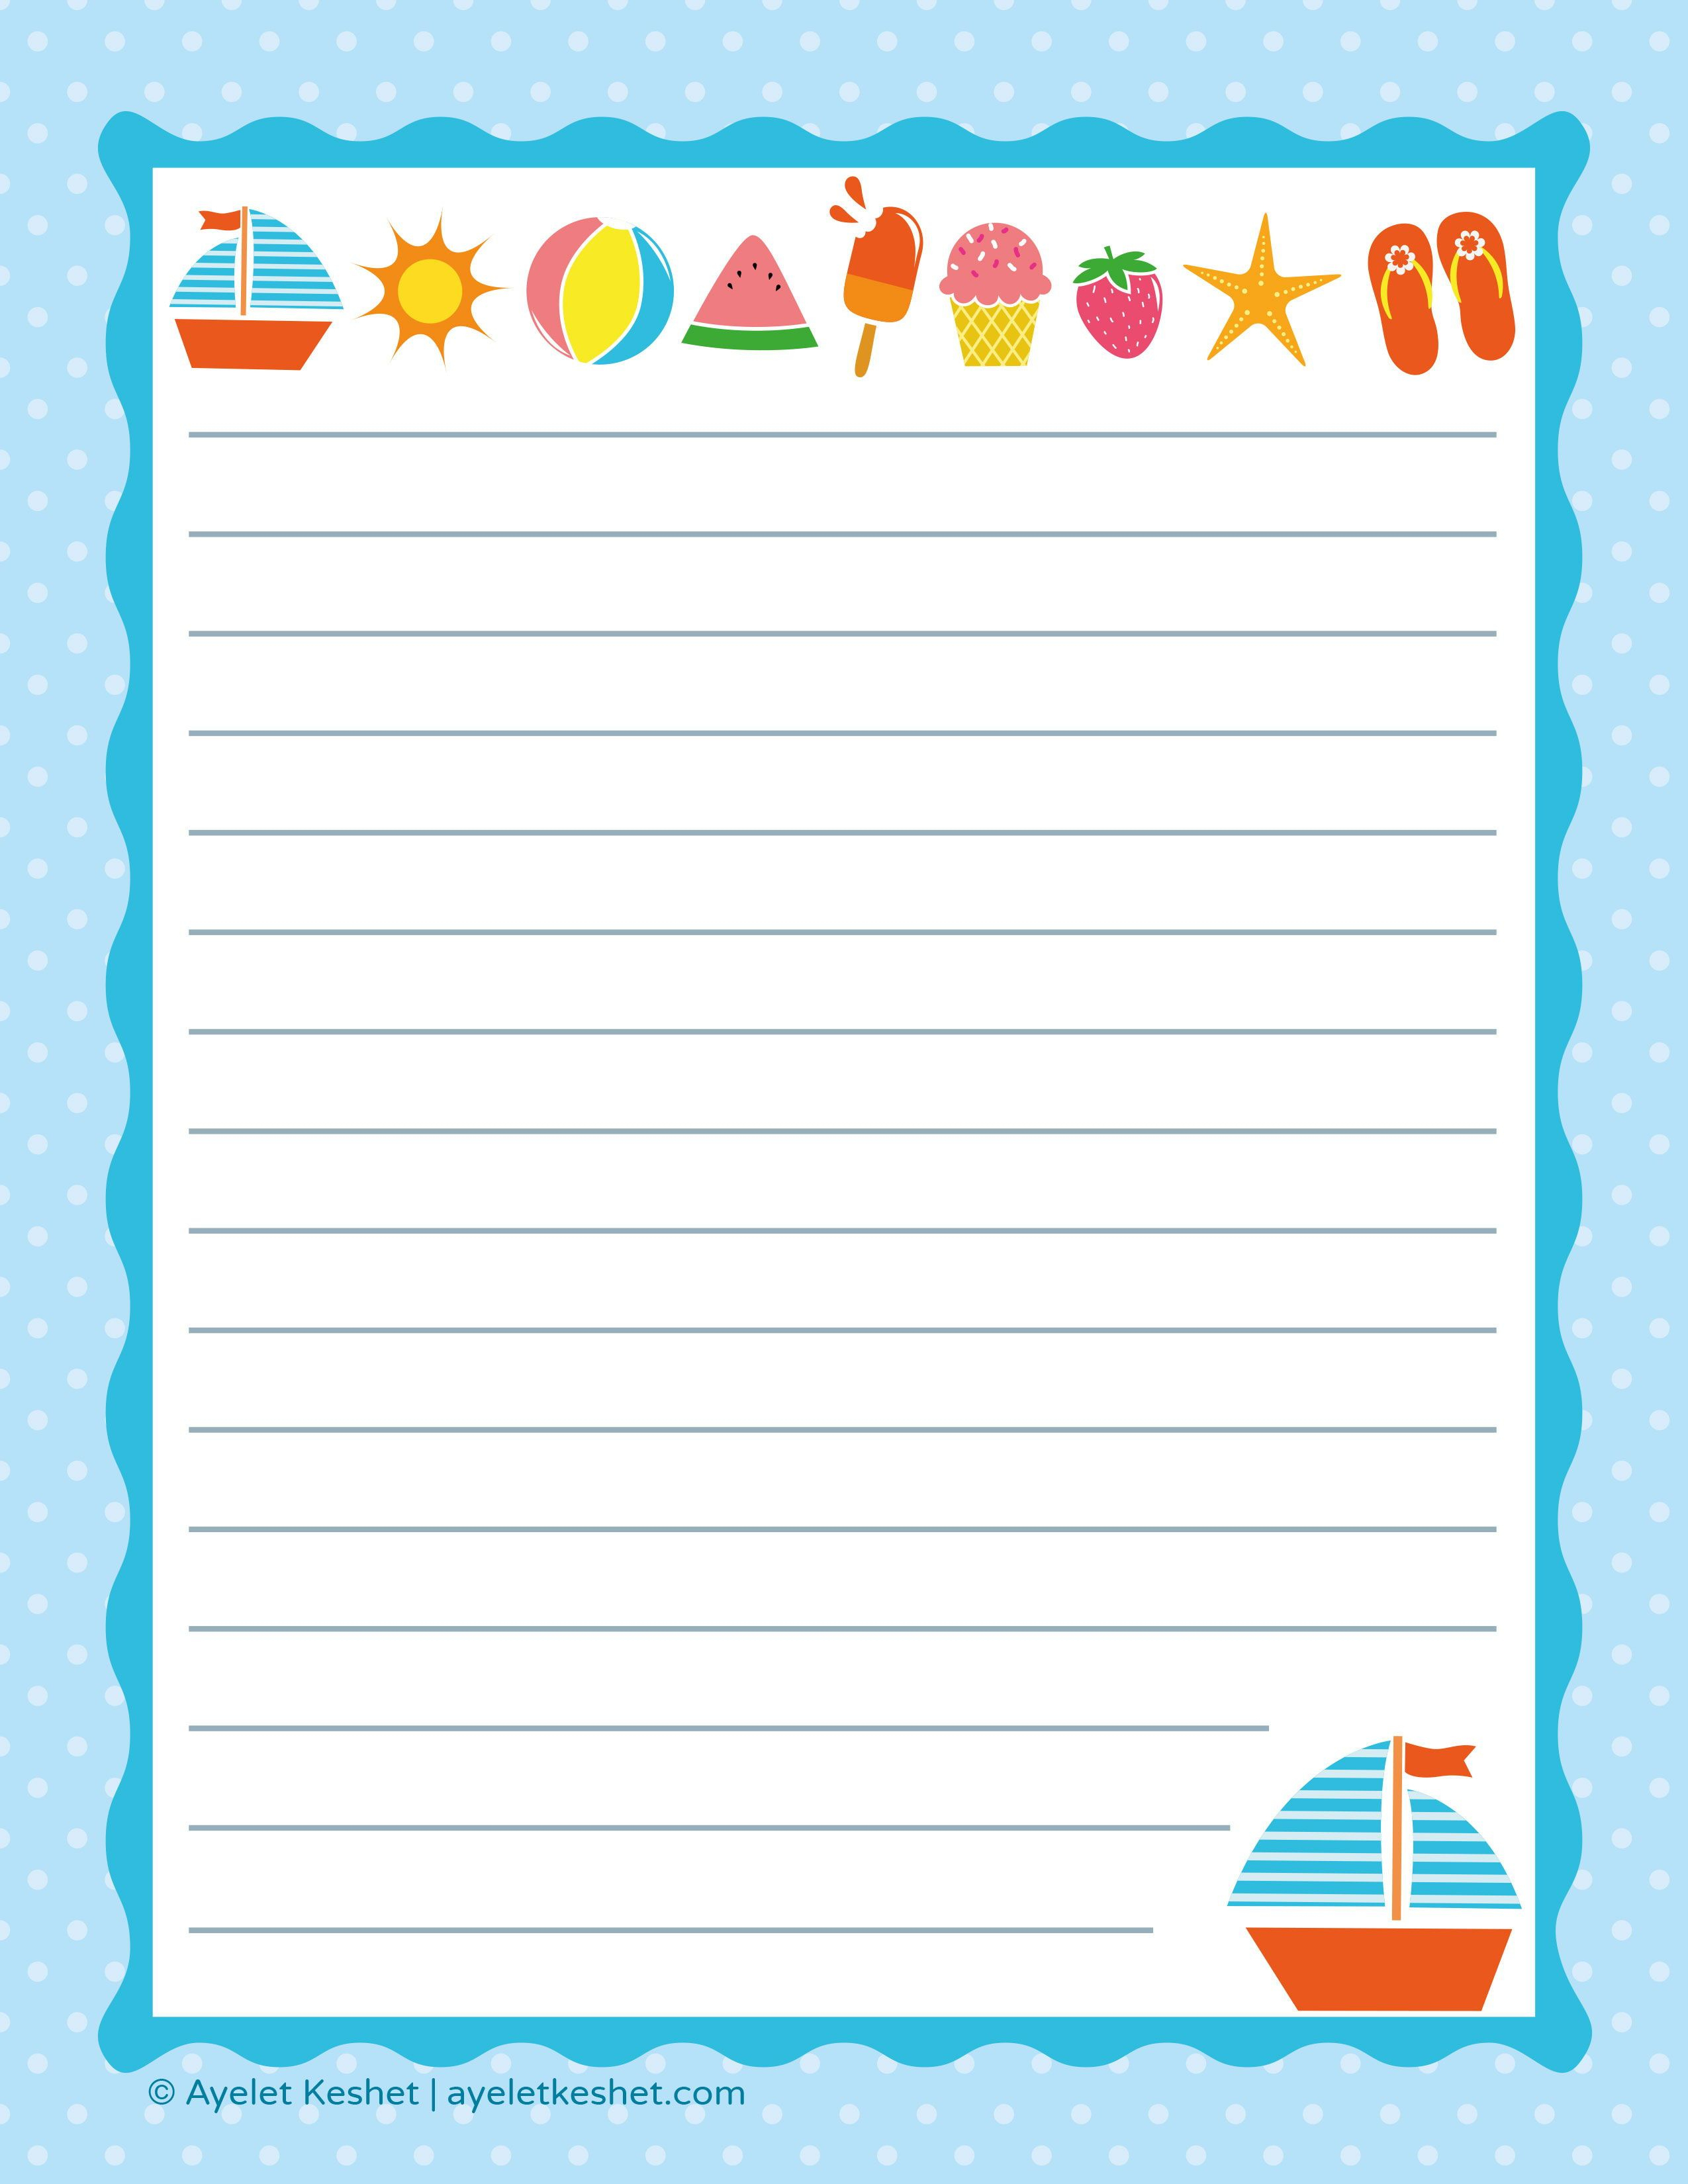 Free Printable Letter Paper | Printables To Go | Pinterest | Free - Free Printable Stationery Paper